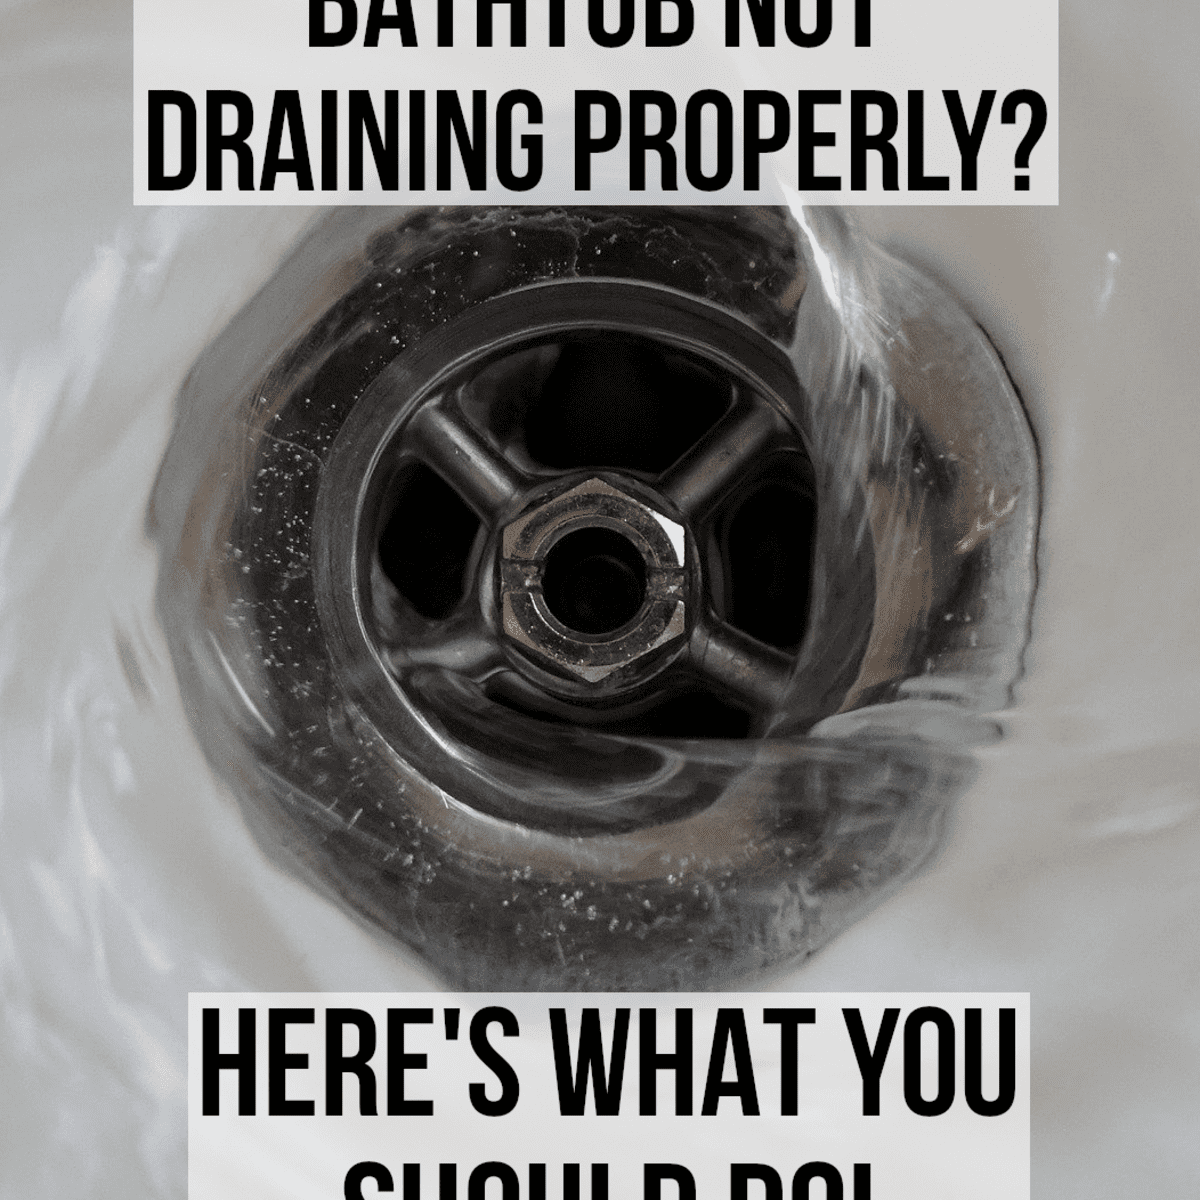 How To Fix A Slow Draining Bathtub Six, What Works Best To Unclog A Bathtub Drain